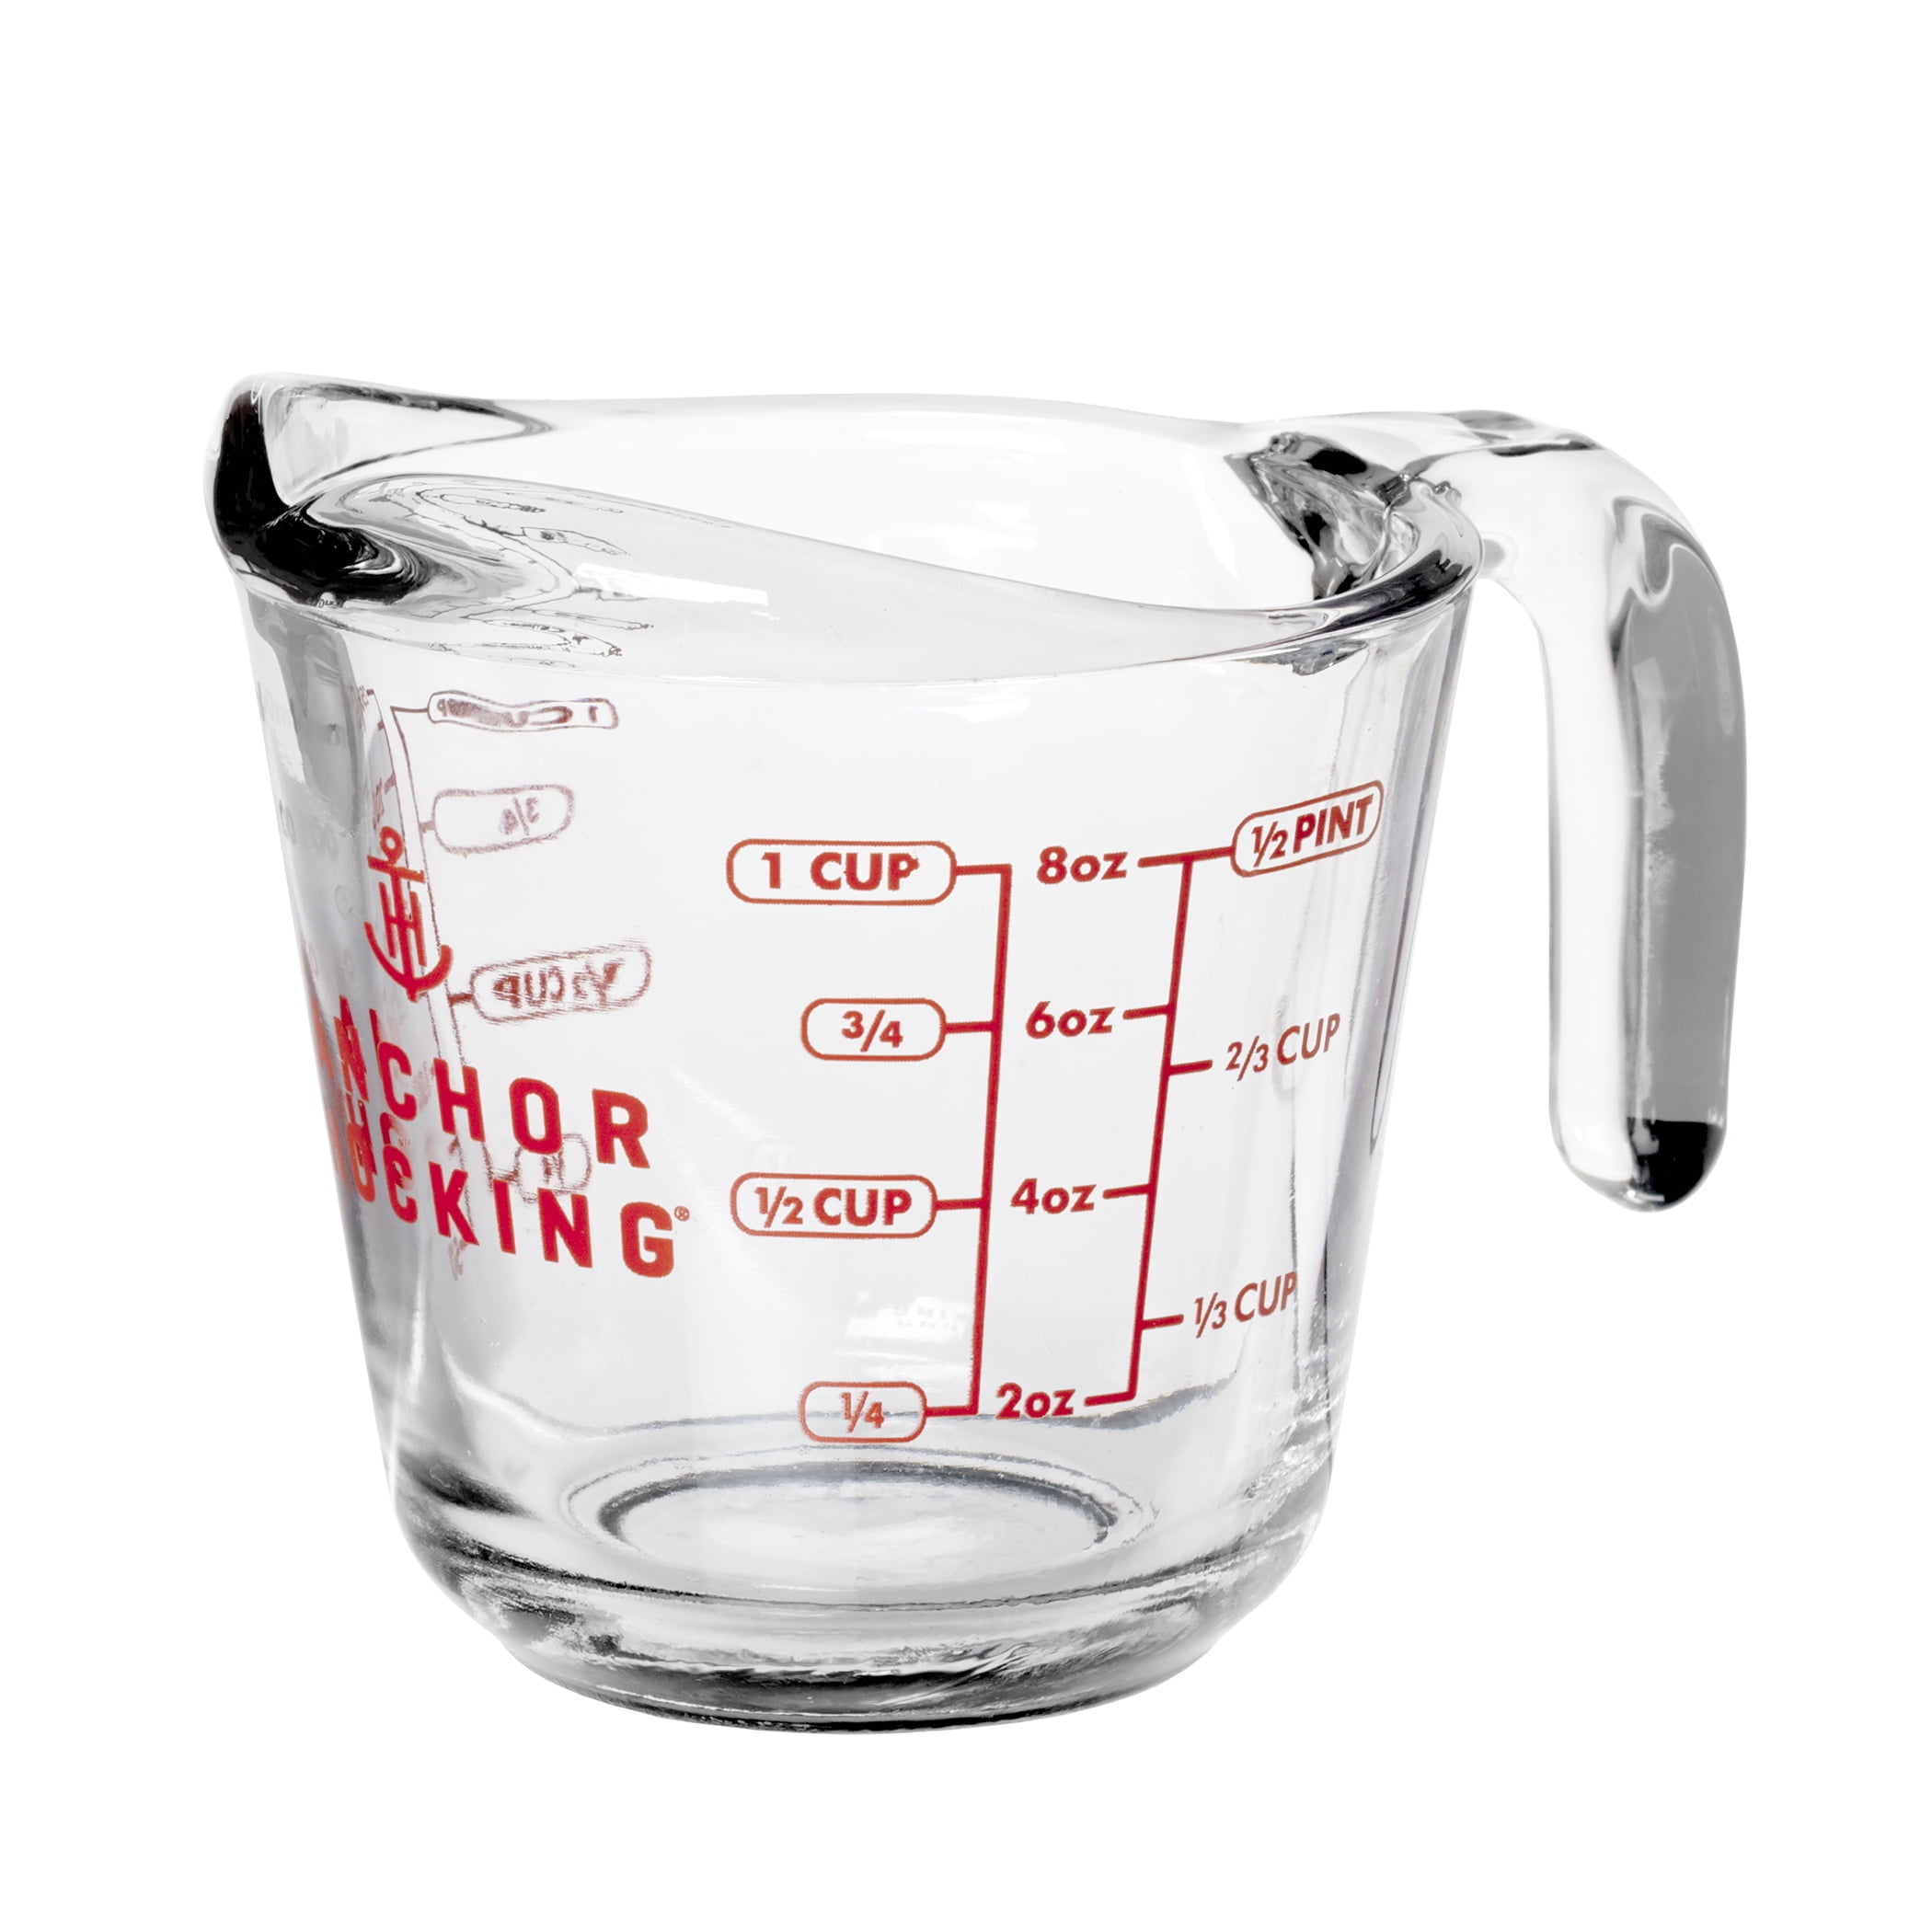 Anchor Hocking Glass Measuring Cup, 1 cup (8oz)